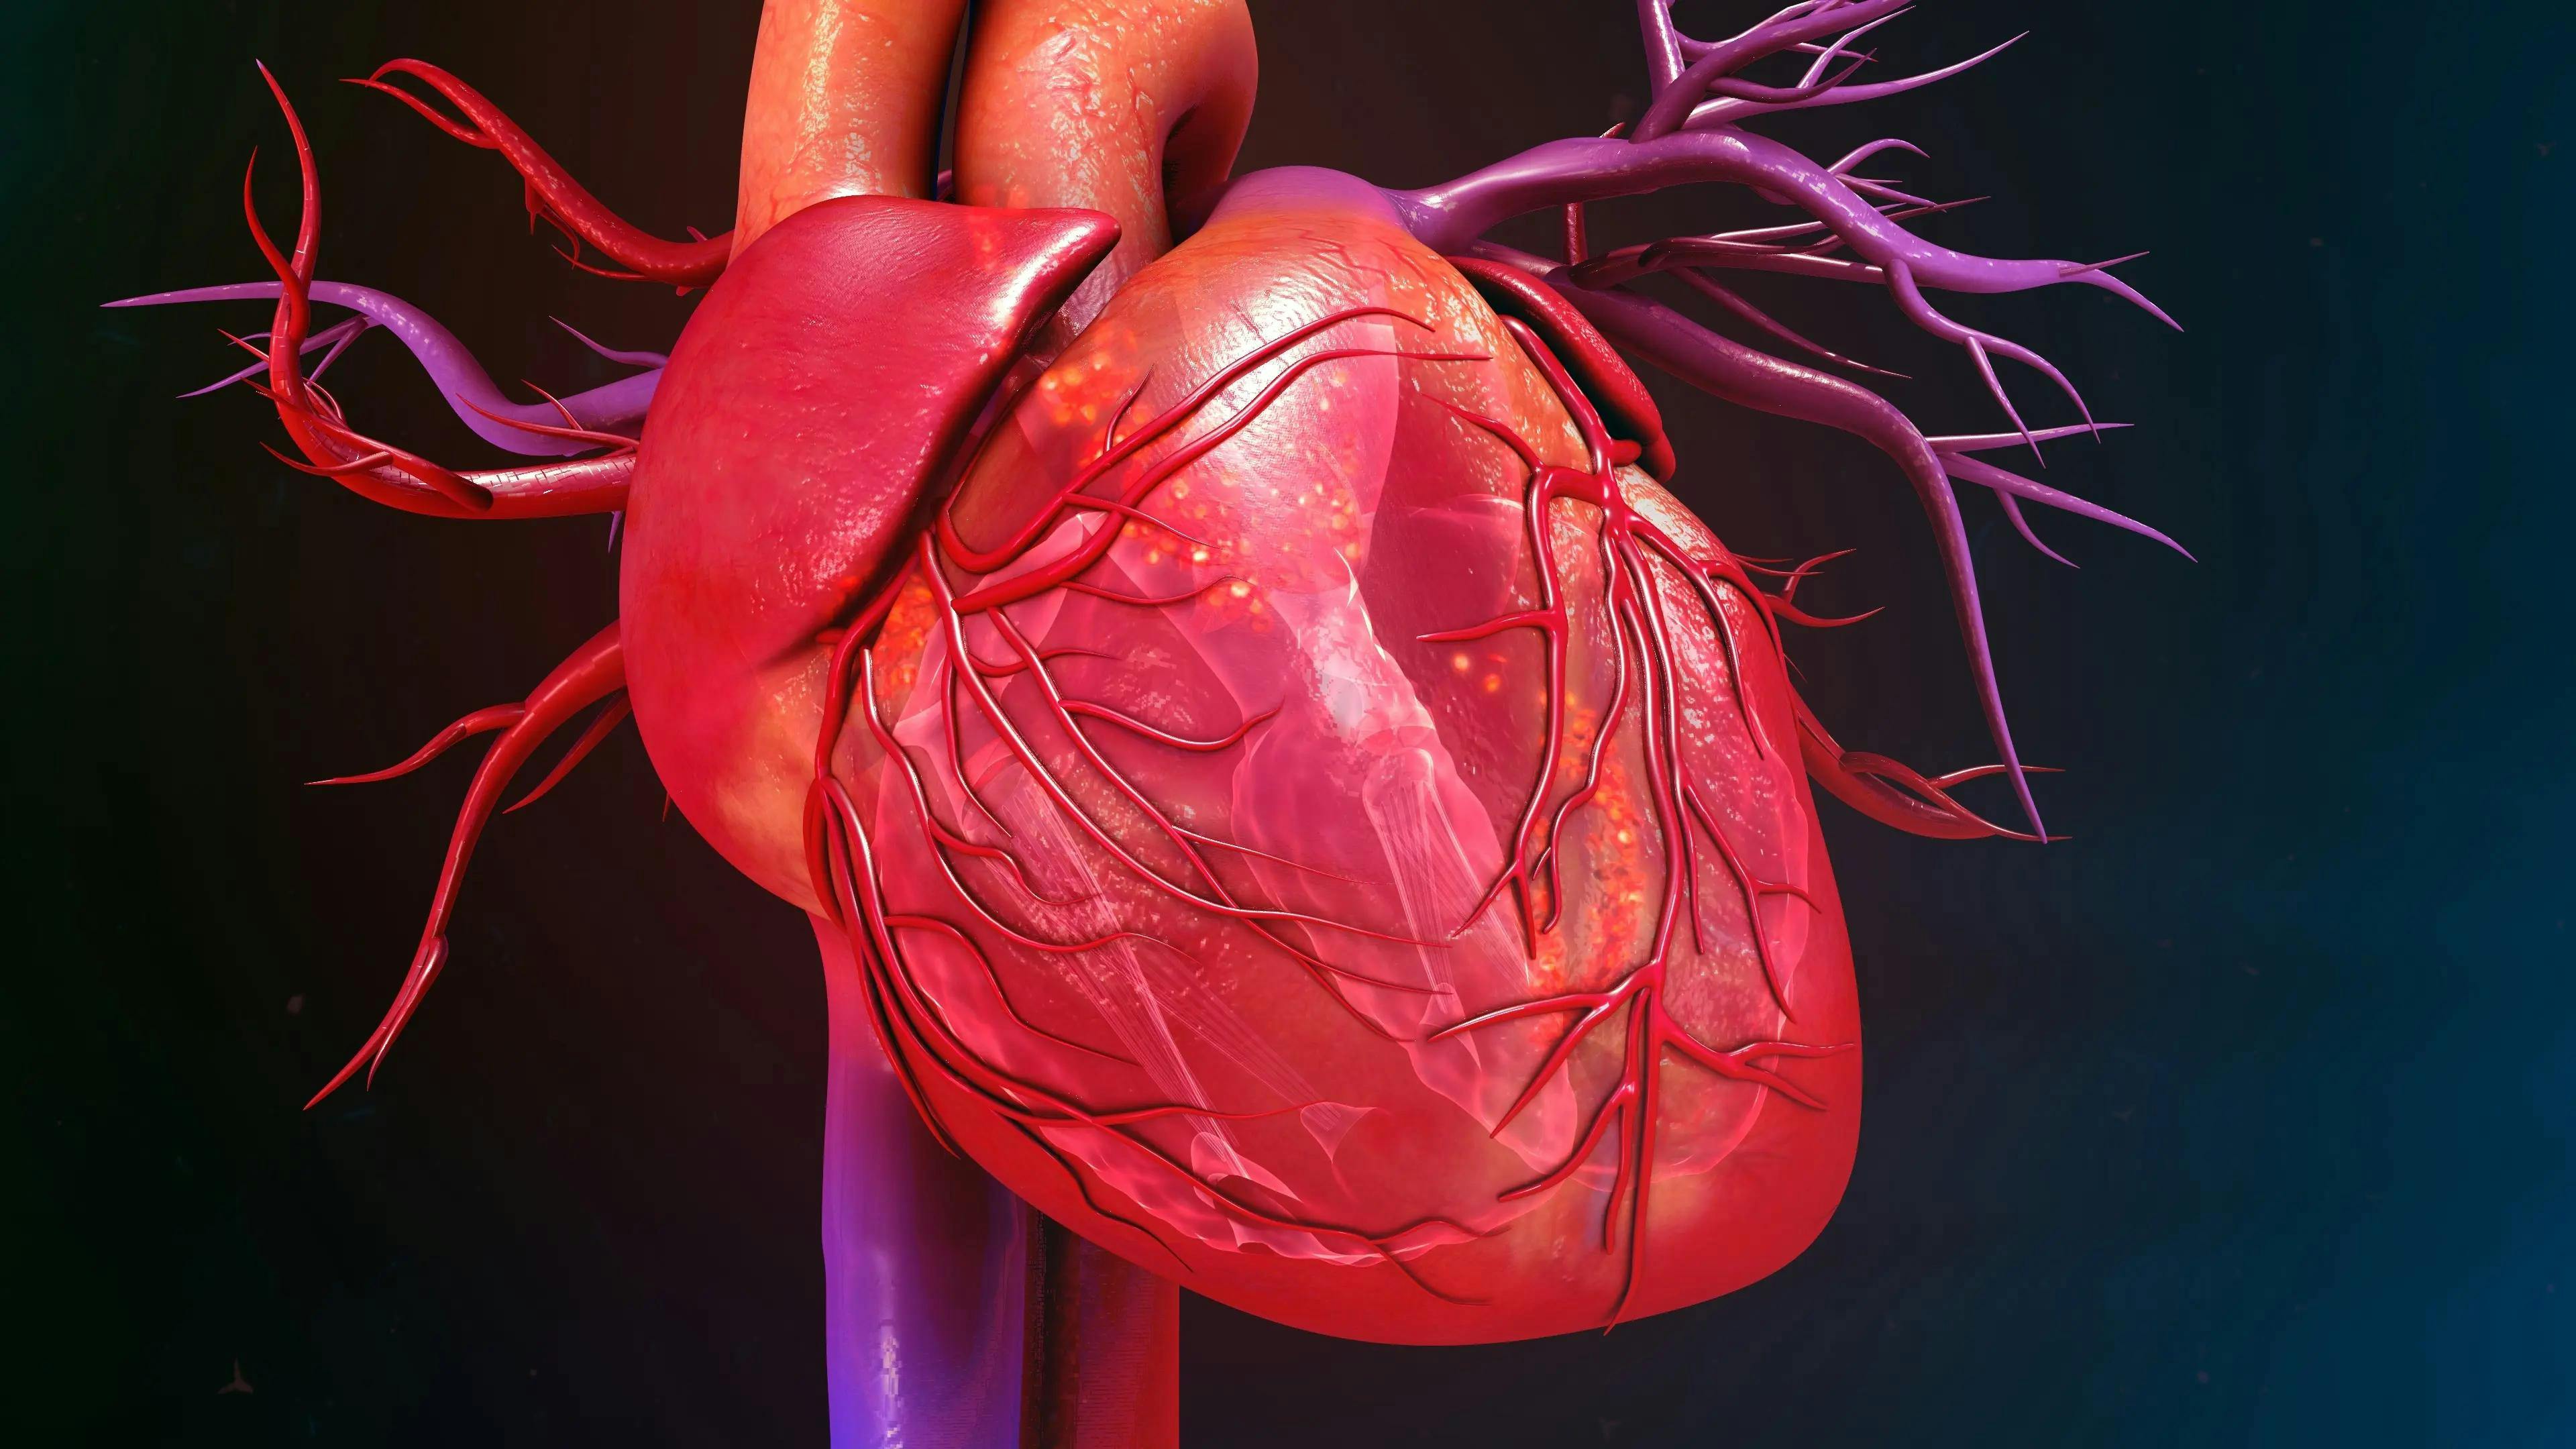 Study Results Link COVID-19 to Higher Risk of Cardiovascular Disease, Death